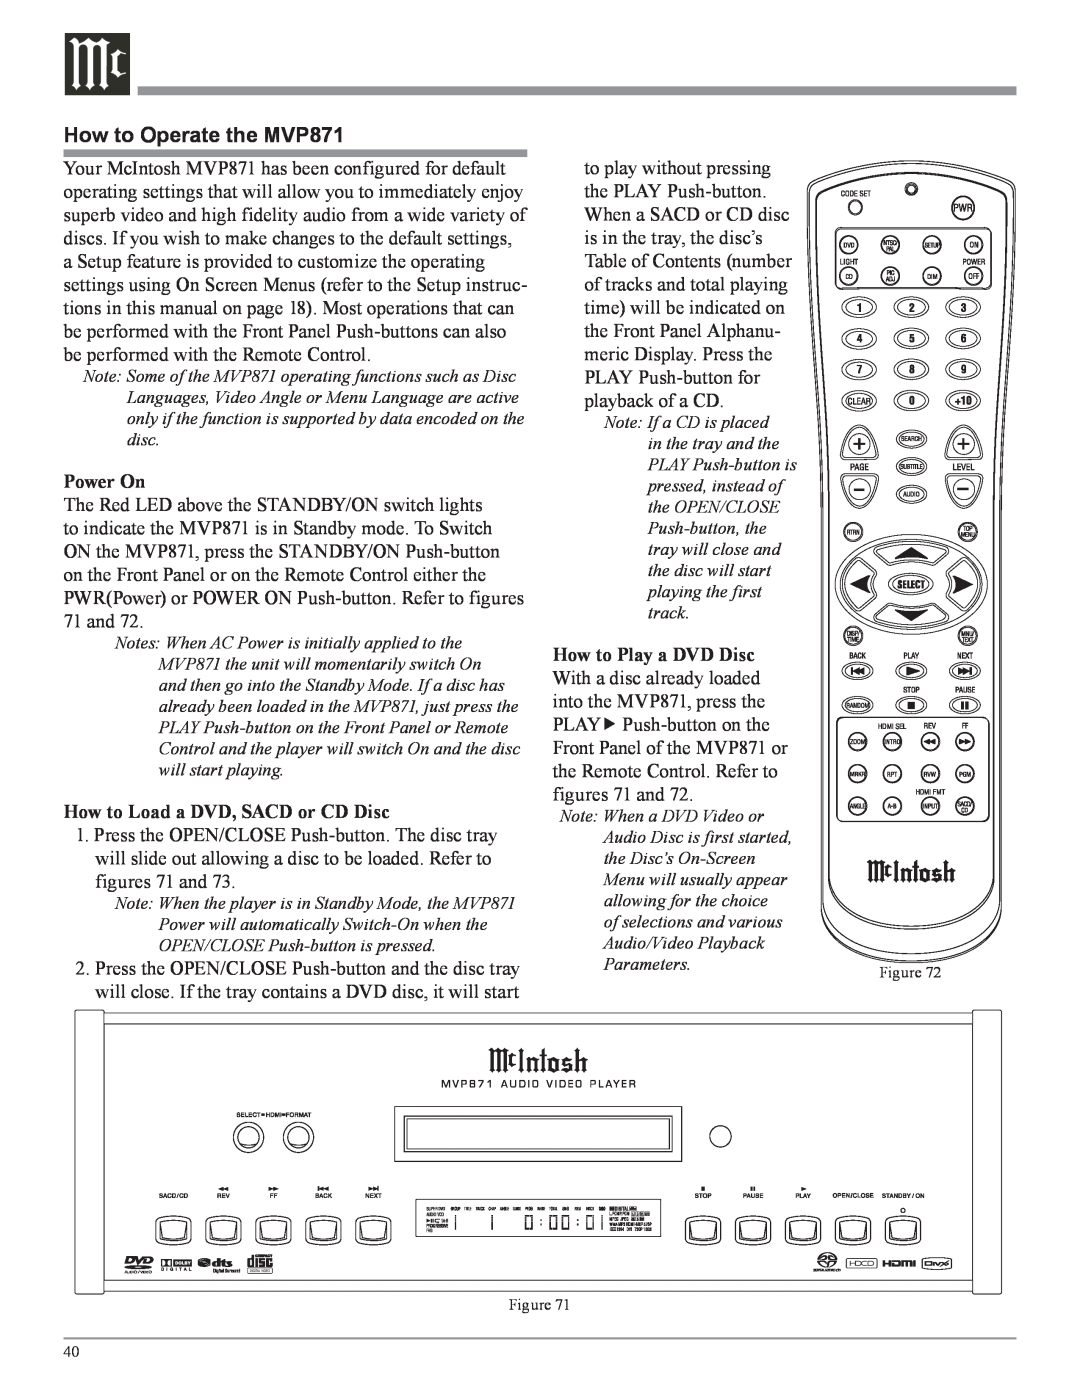 McIntosh owner manual How to Operate the MVP871, Power On, How to Load a DVD, SACD or CD Disc 